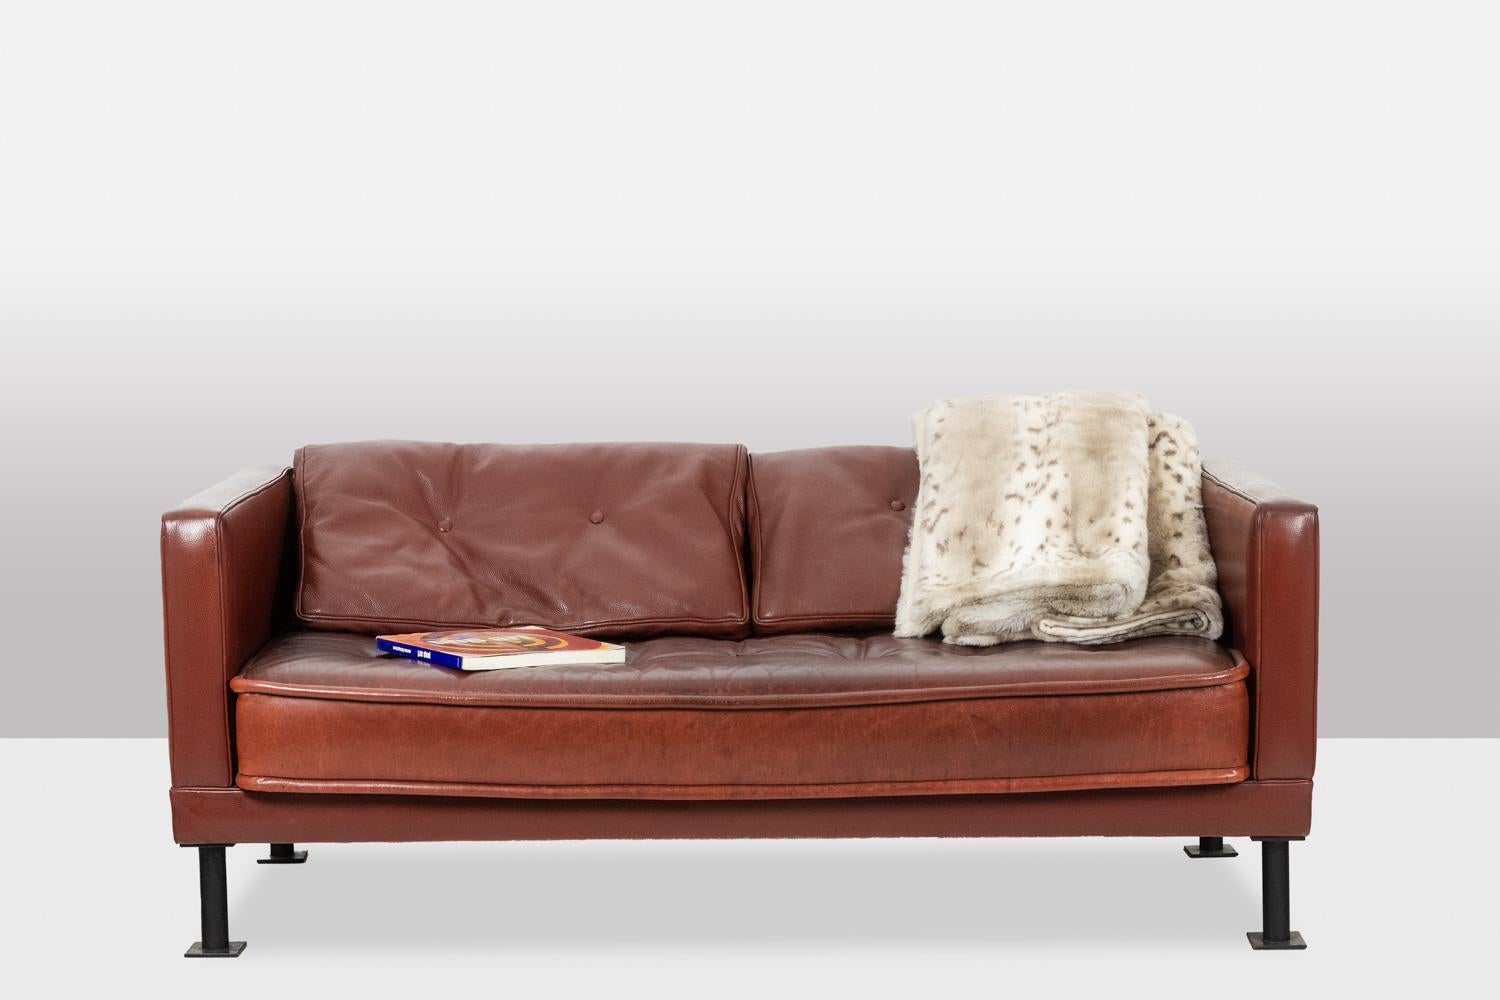 Leather Christian Duc, Sofa model “Orwell”. Year 1983. For Sale